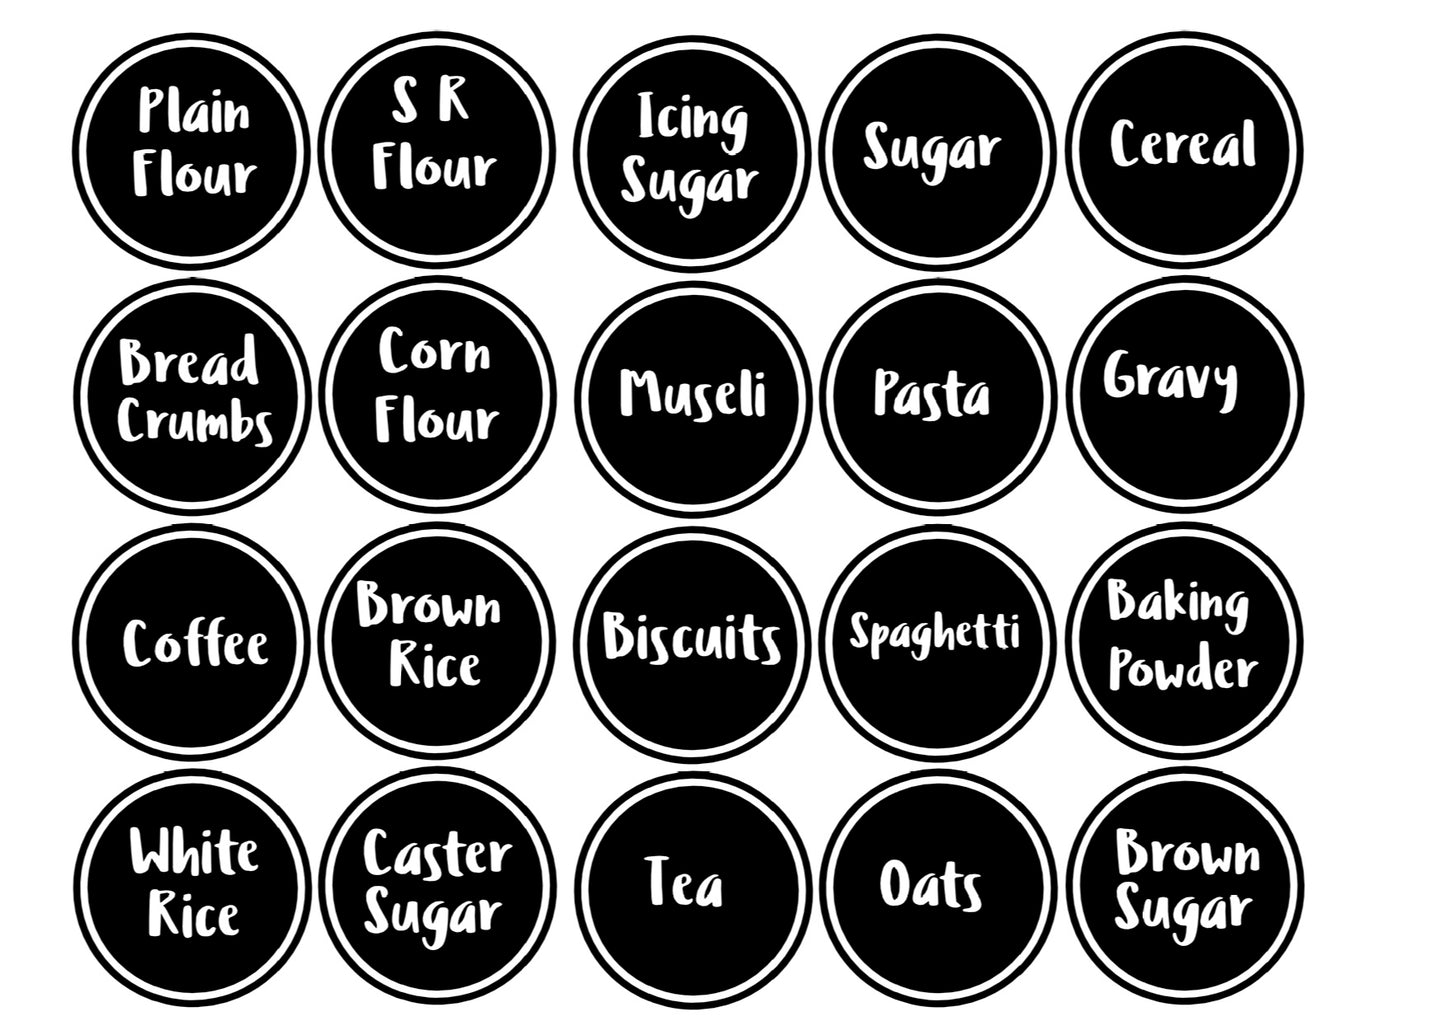 Small Round Pantry Labels - 20 Pack